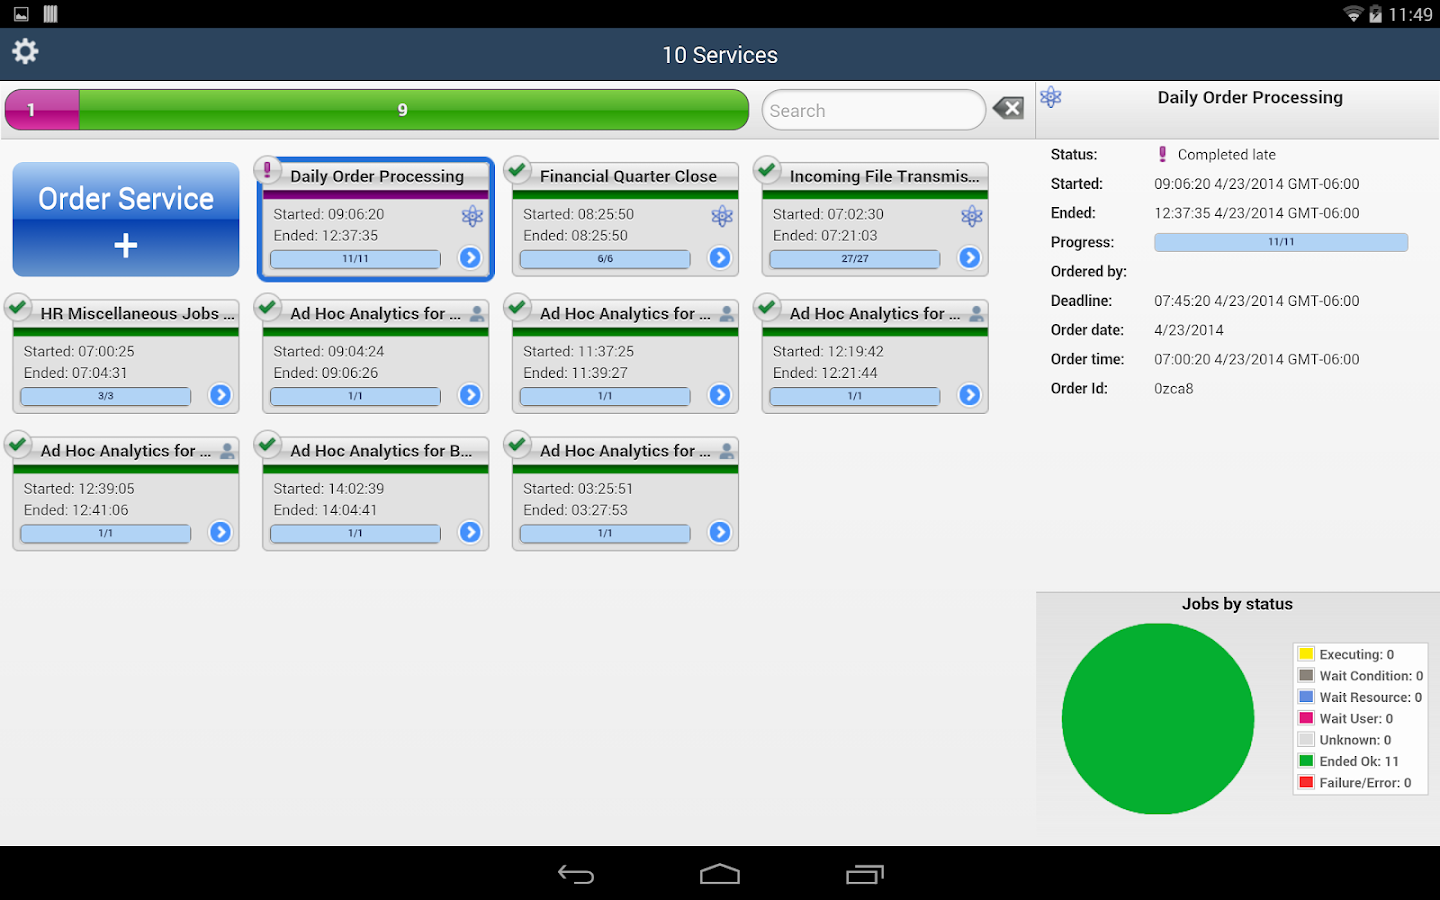 BMC Control-M Self Service - Android Apps on Google Play